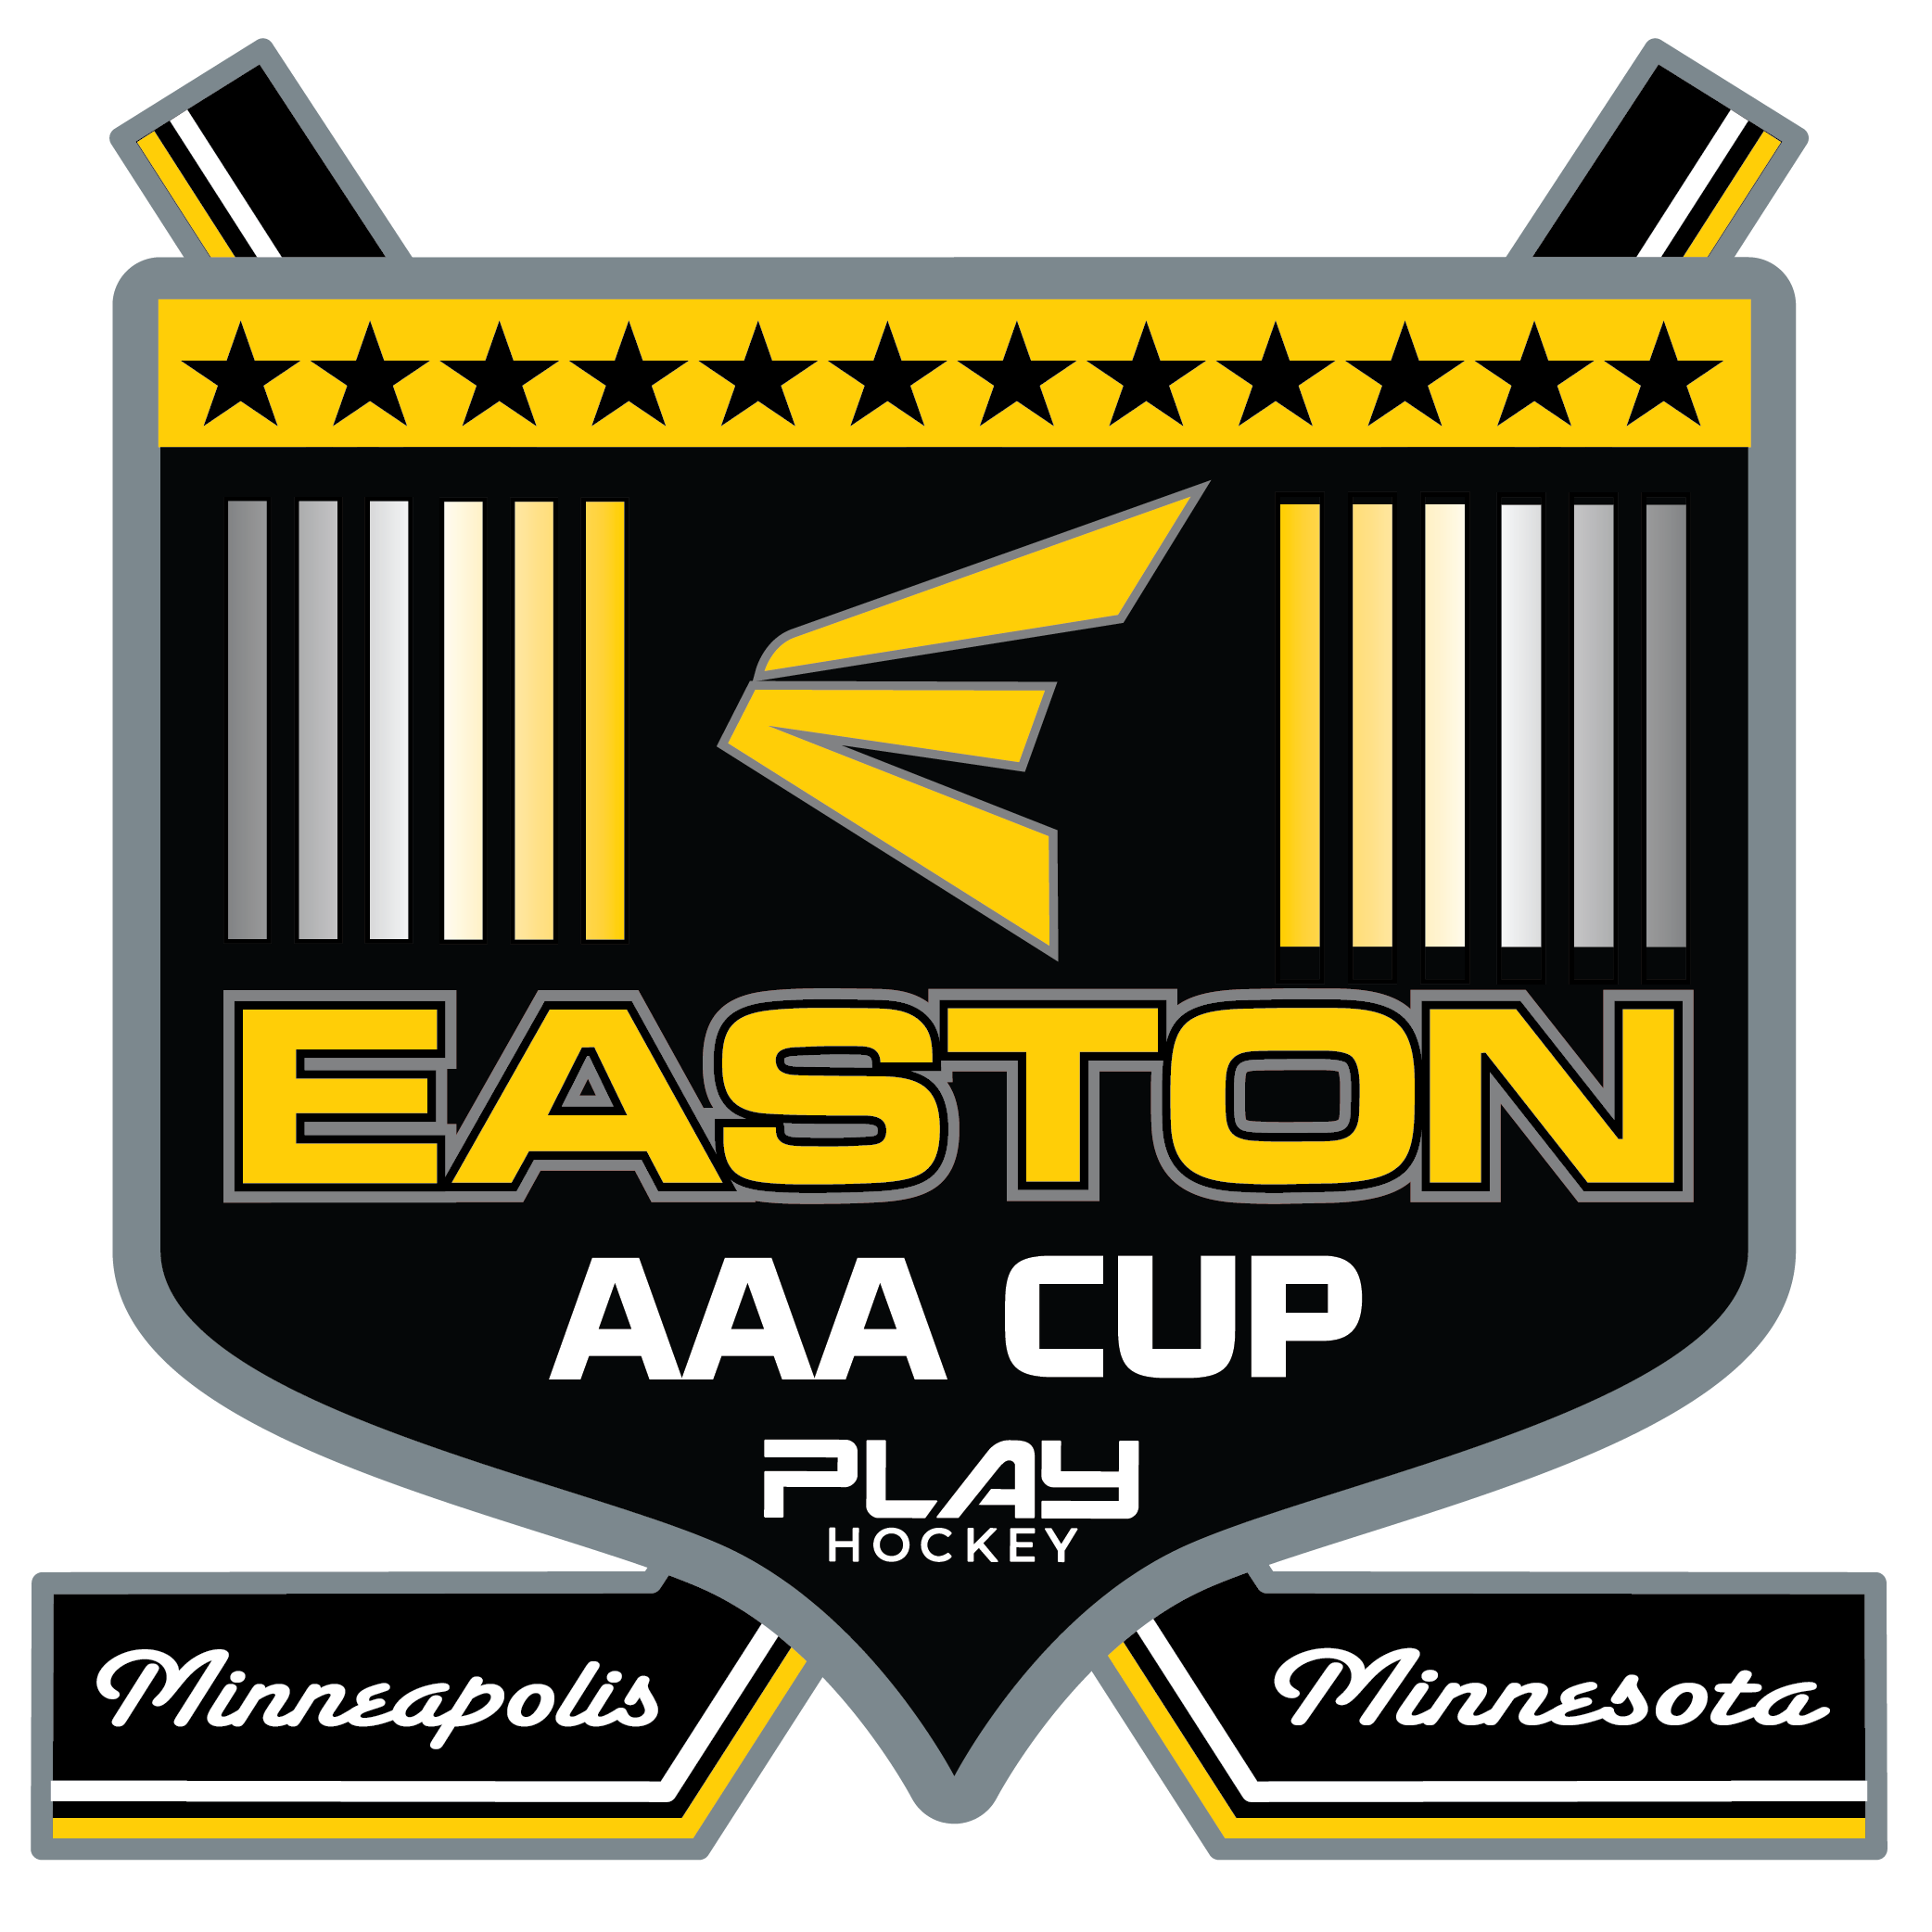 https://20502767.fs1.hubspotusercontent-na1.net/hubfs/20502767/New%20Event%20Logos/PH-Easton-Cup-01.png